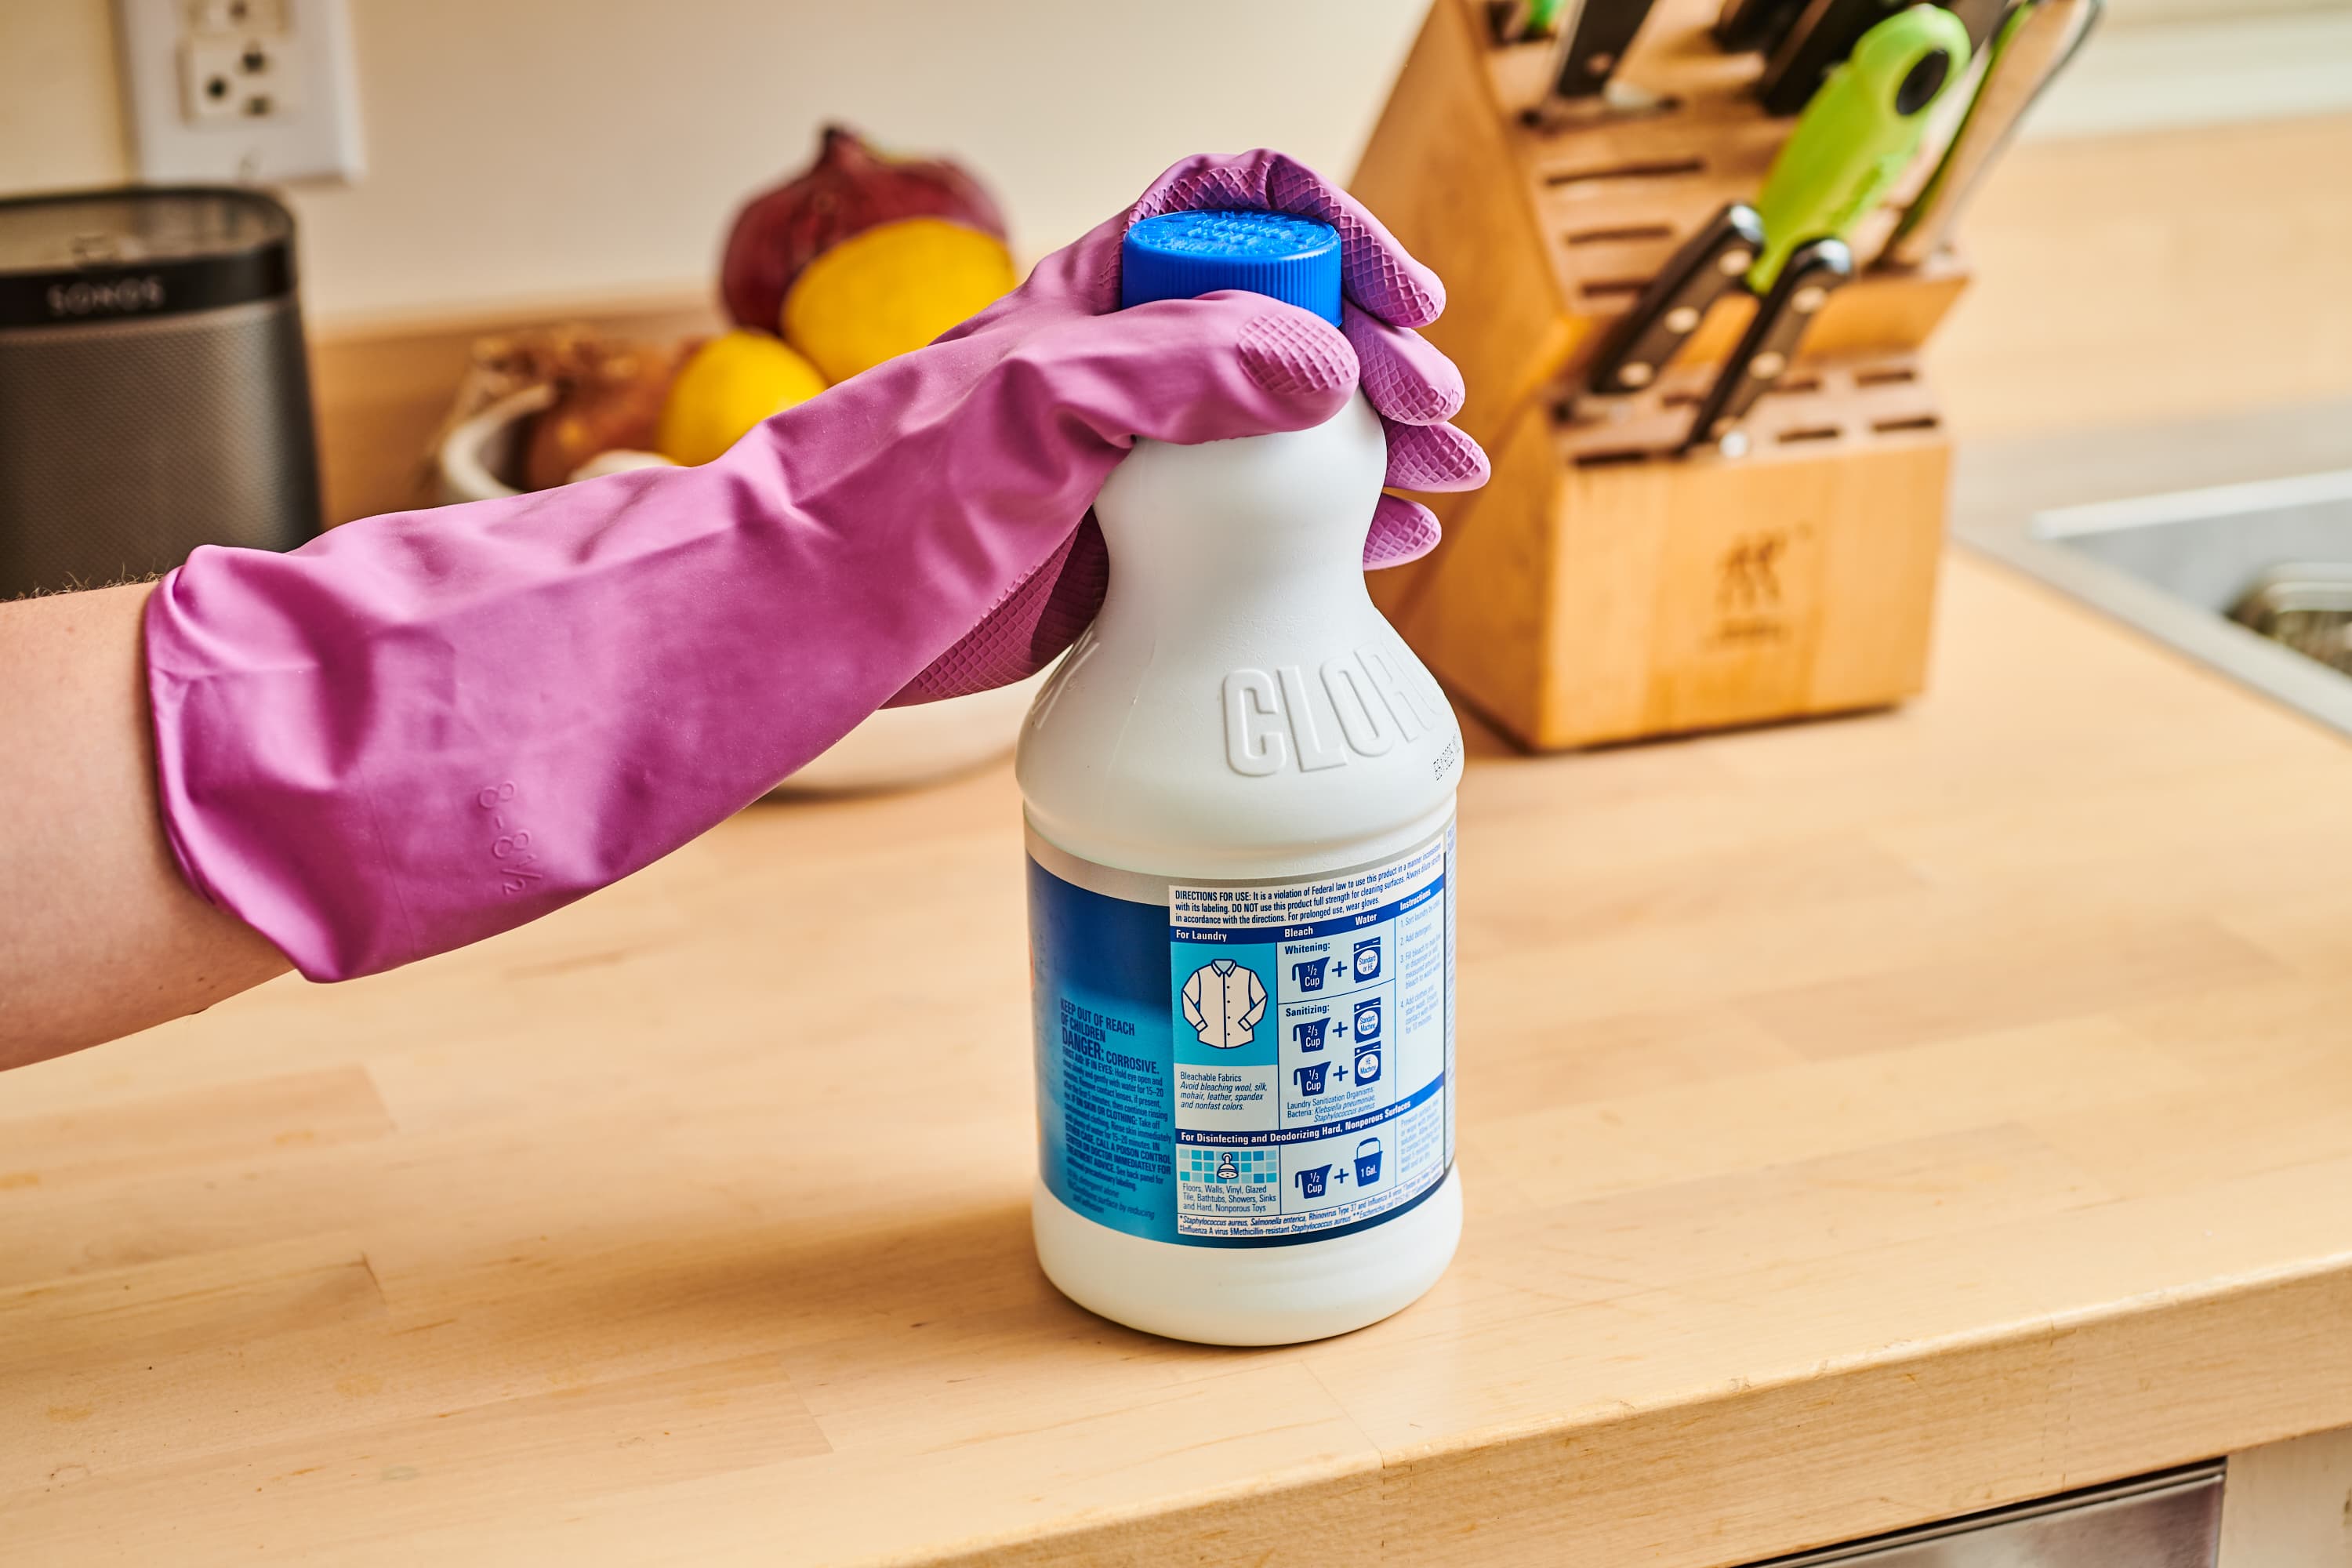 Bleach Cleaning: How to Disinfect Surfaces and Whiten Laundry with